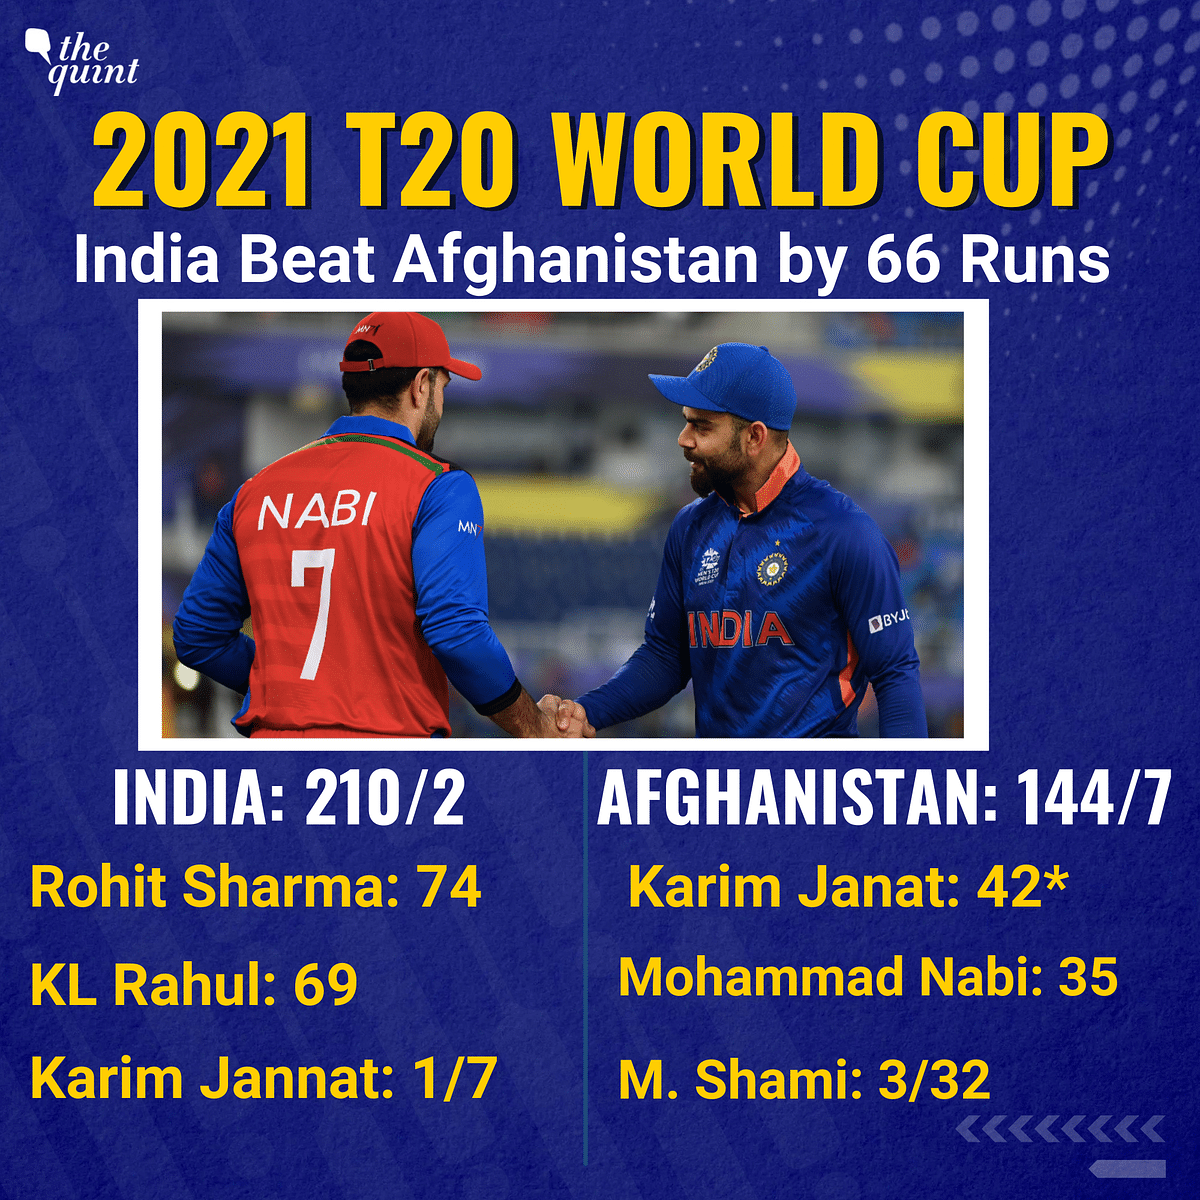 India posted 210 which is the highest total so far at the 2021 T20 World Cup. 